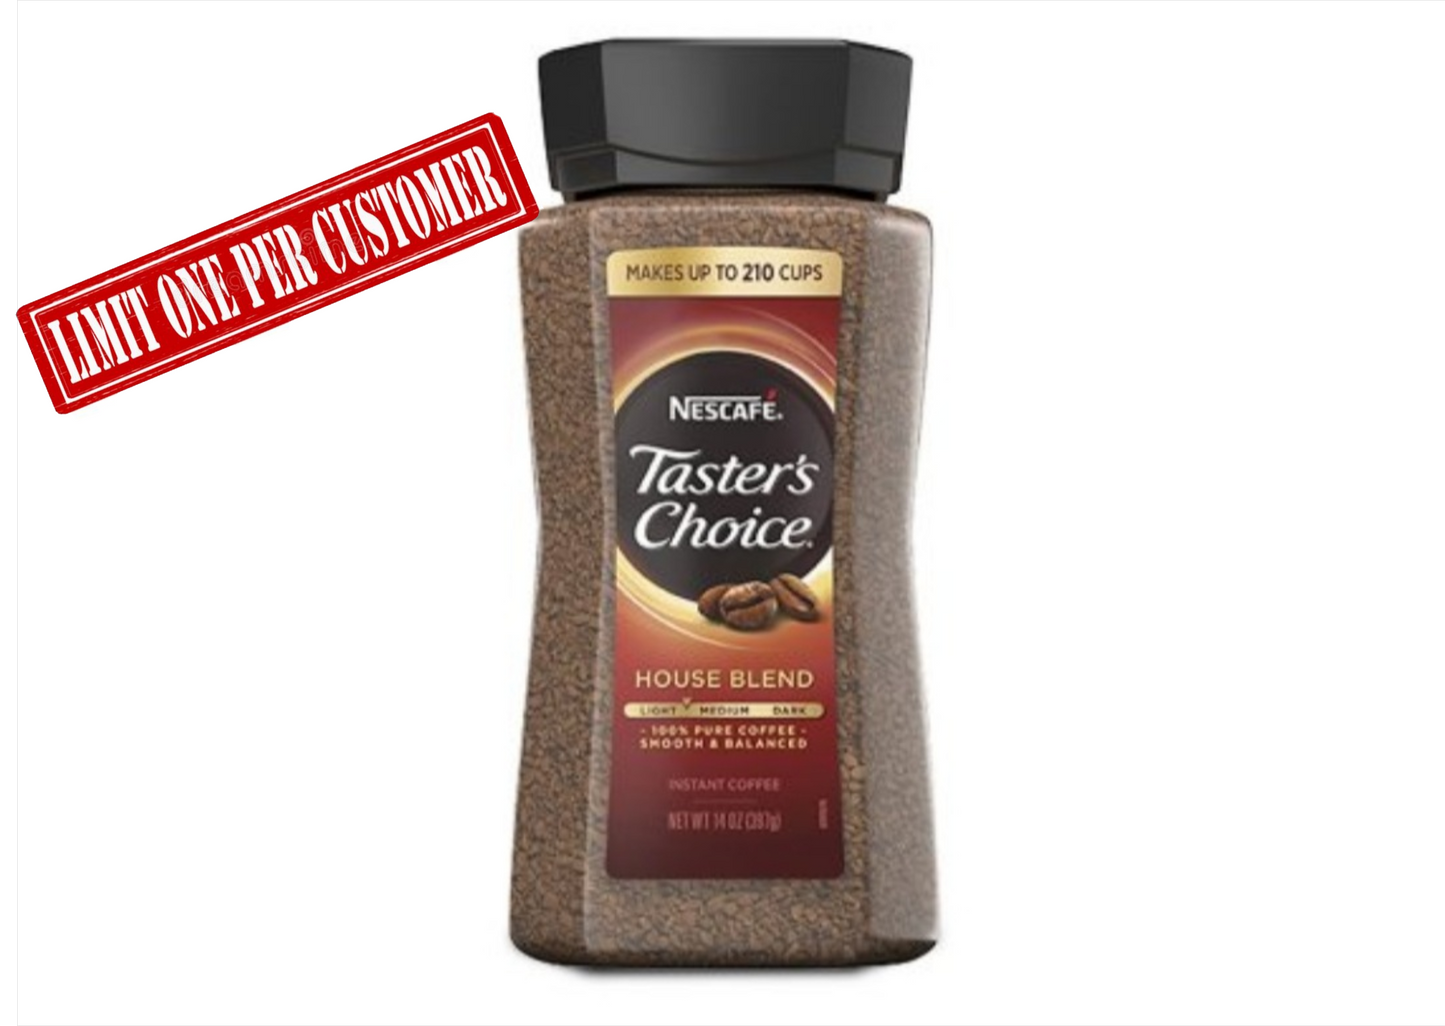 NESCAFE Taster's Choice Instant Coffee, House Blend (14 oz.)